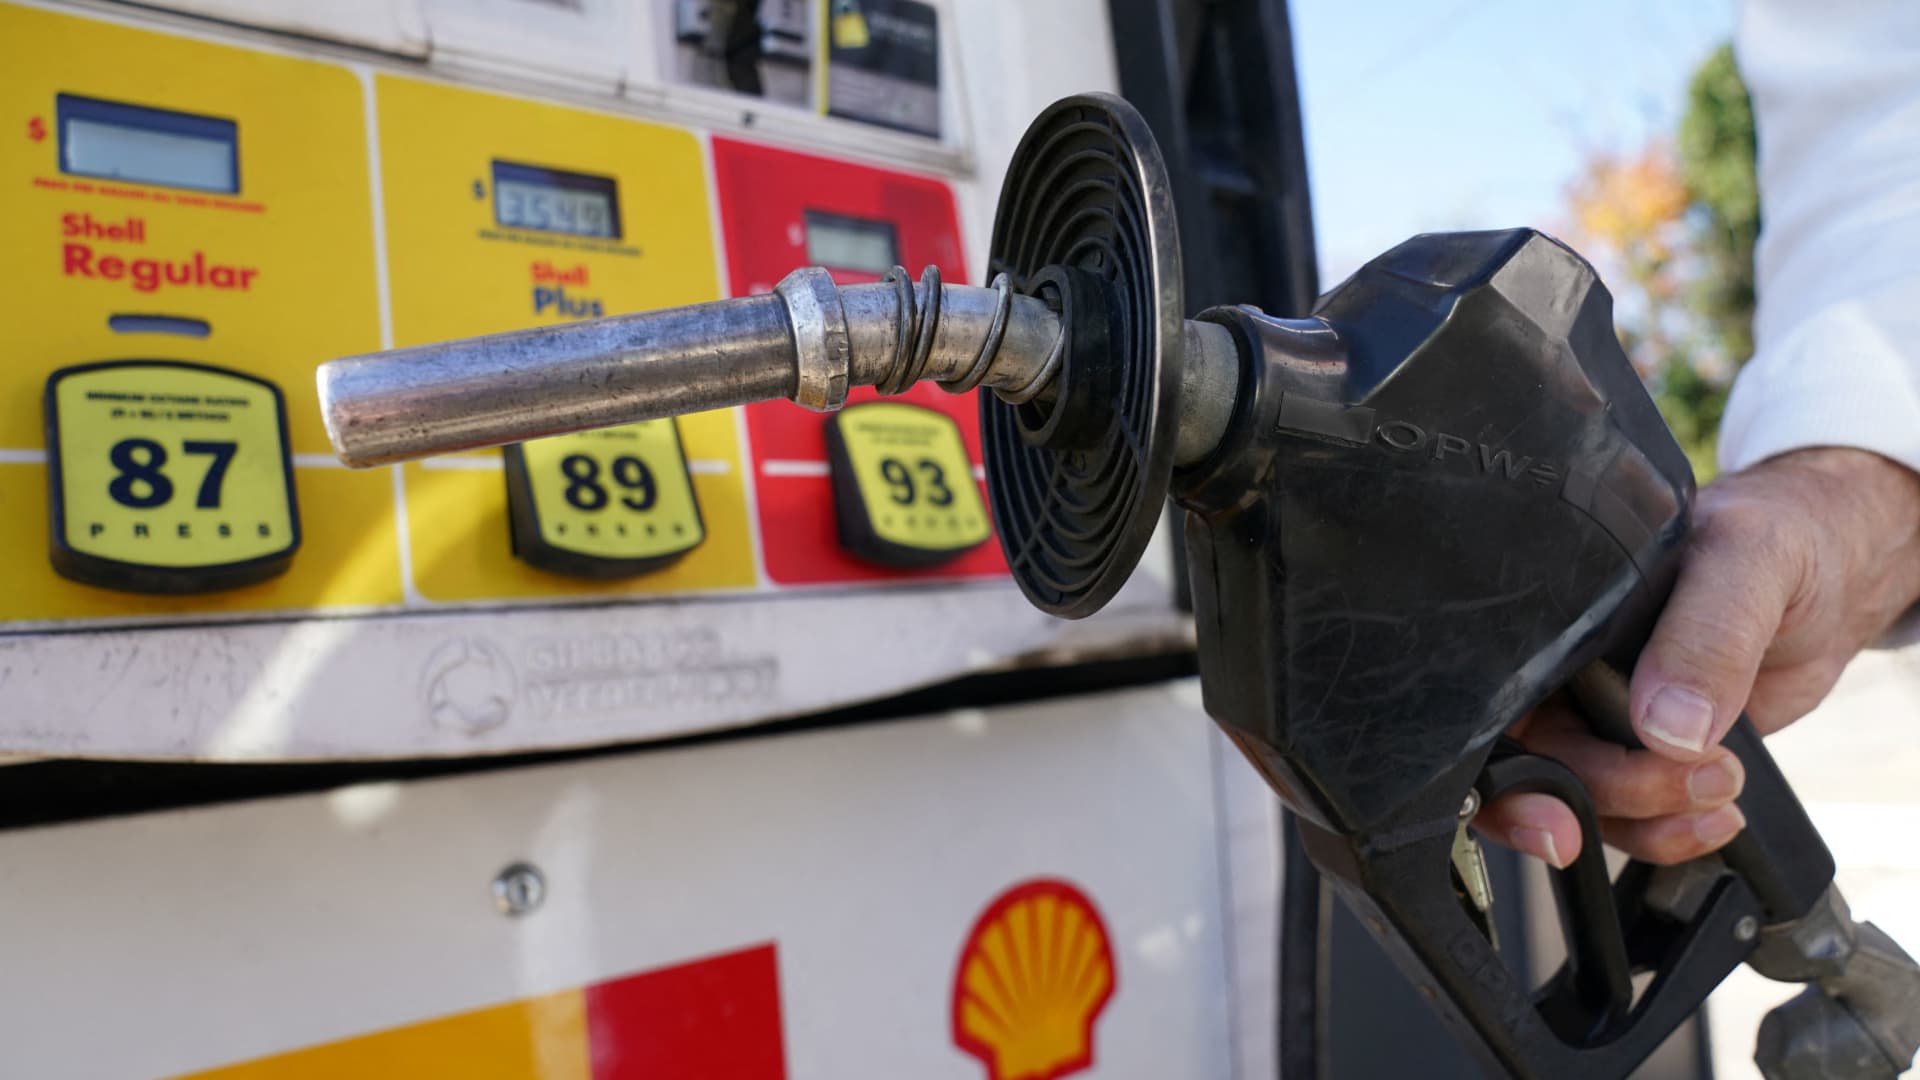 Why New Jersey doesn’t let people pump their own gas